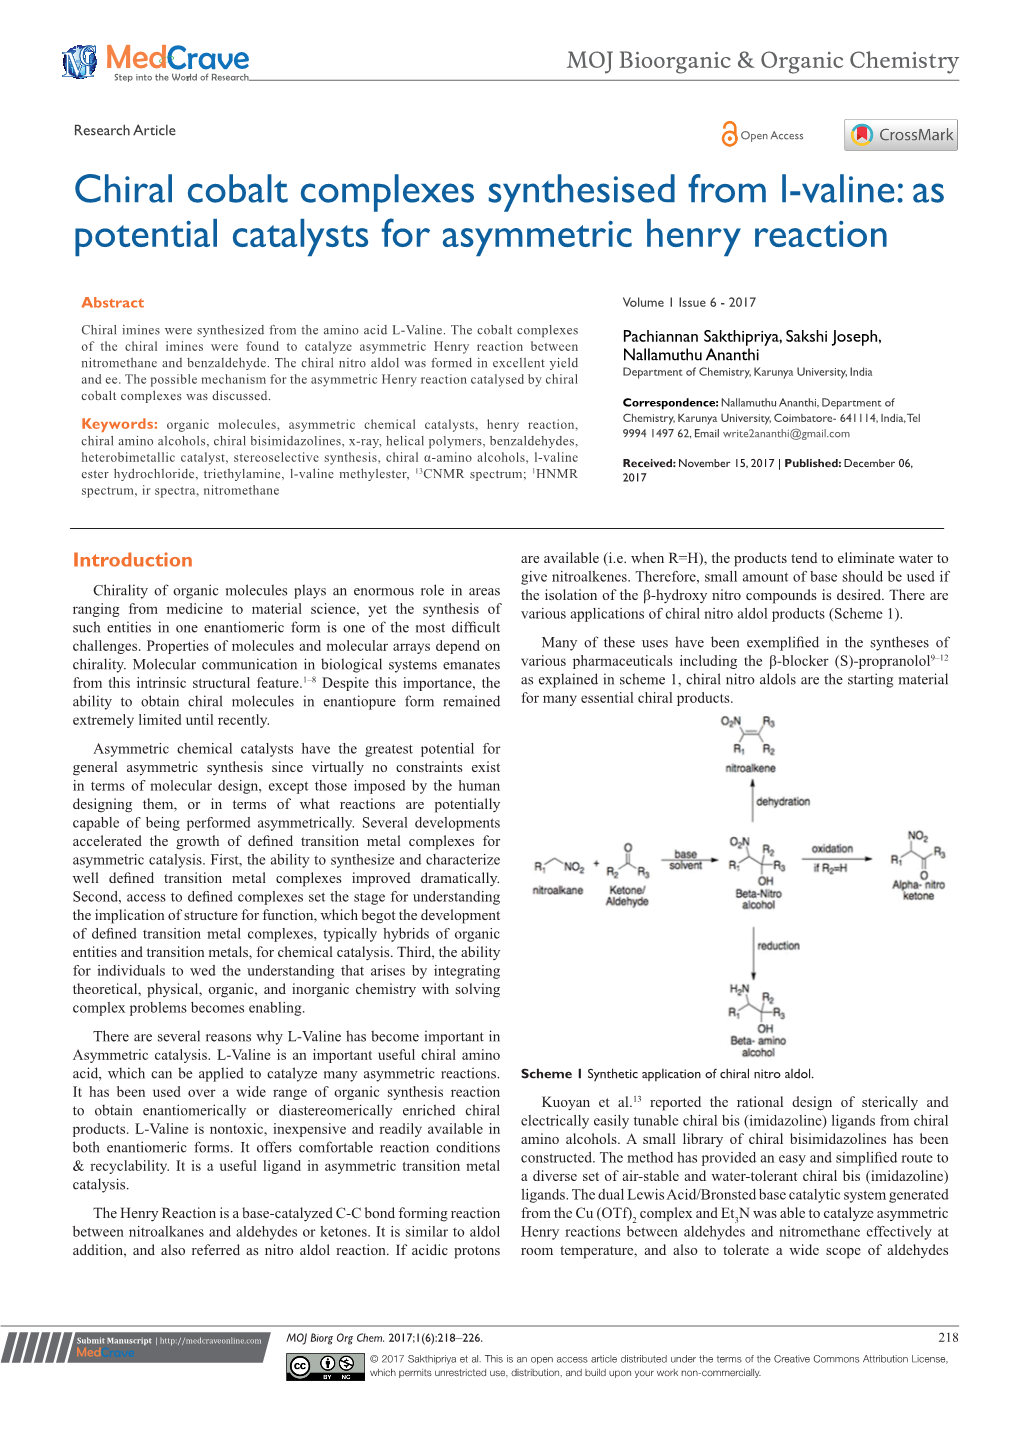 As Potential Catalysts for Asymmetric Henry Reaction